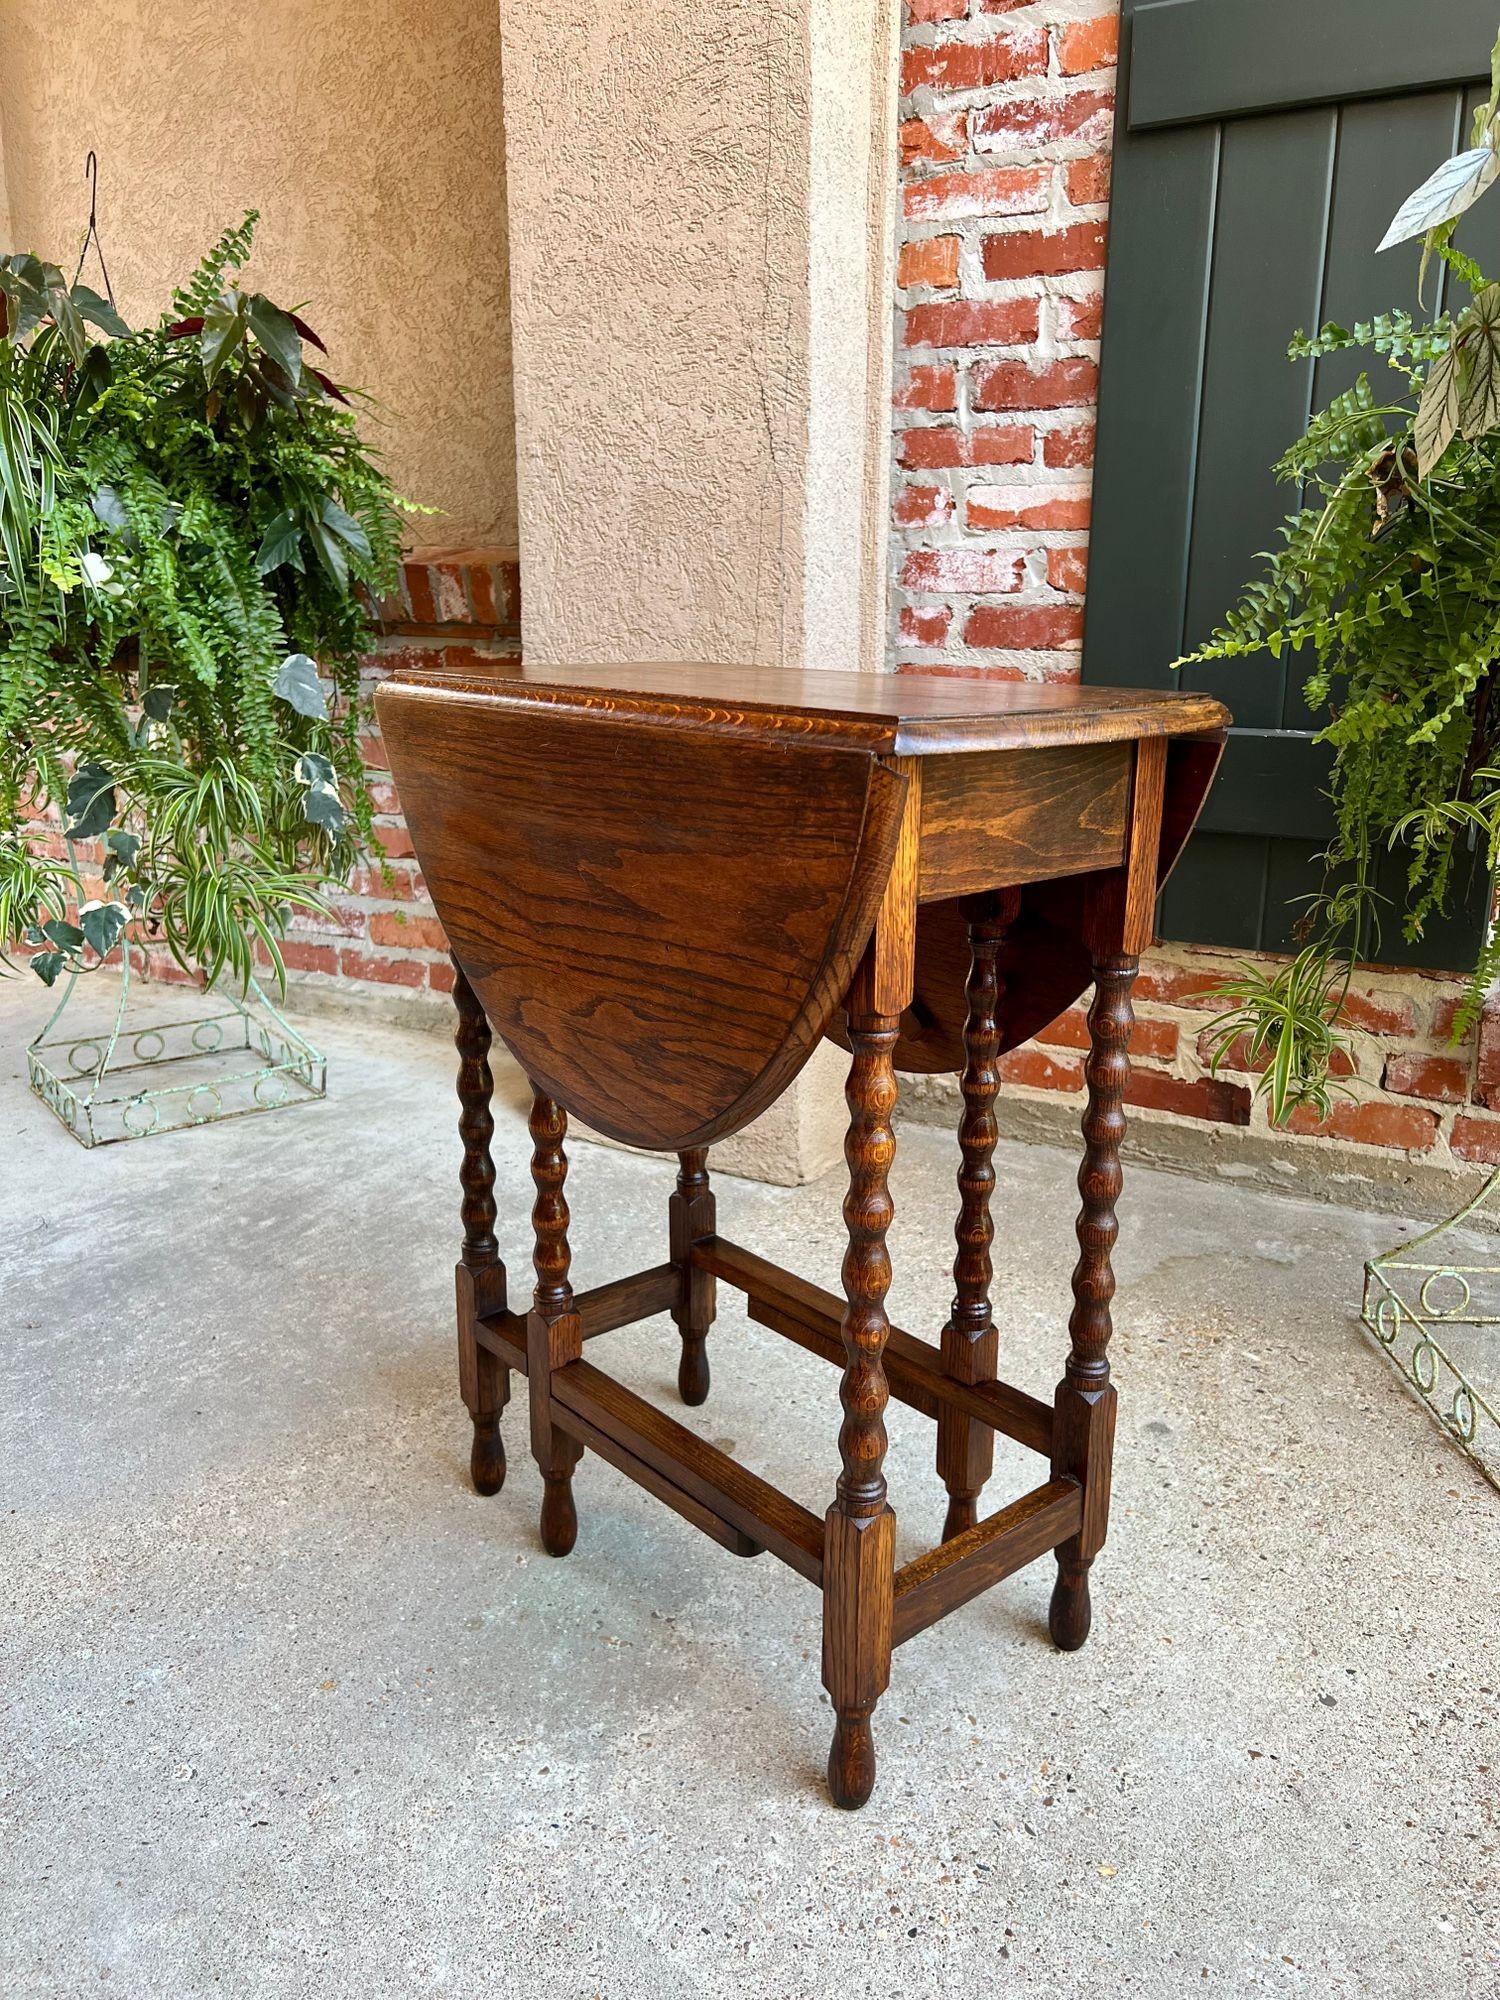 Antique English Drop Leaf Side Sofa Table Petite Oak Jacobean Bobbin w Gate Legs.
 
Direct from England, (YES, our English container finally arrived, and we have some amazing English antiques, and of course, lots of barley twist)! This is a